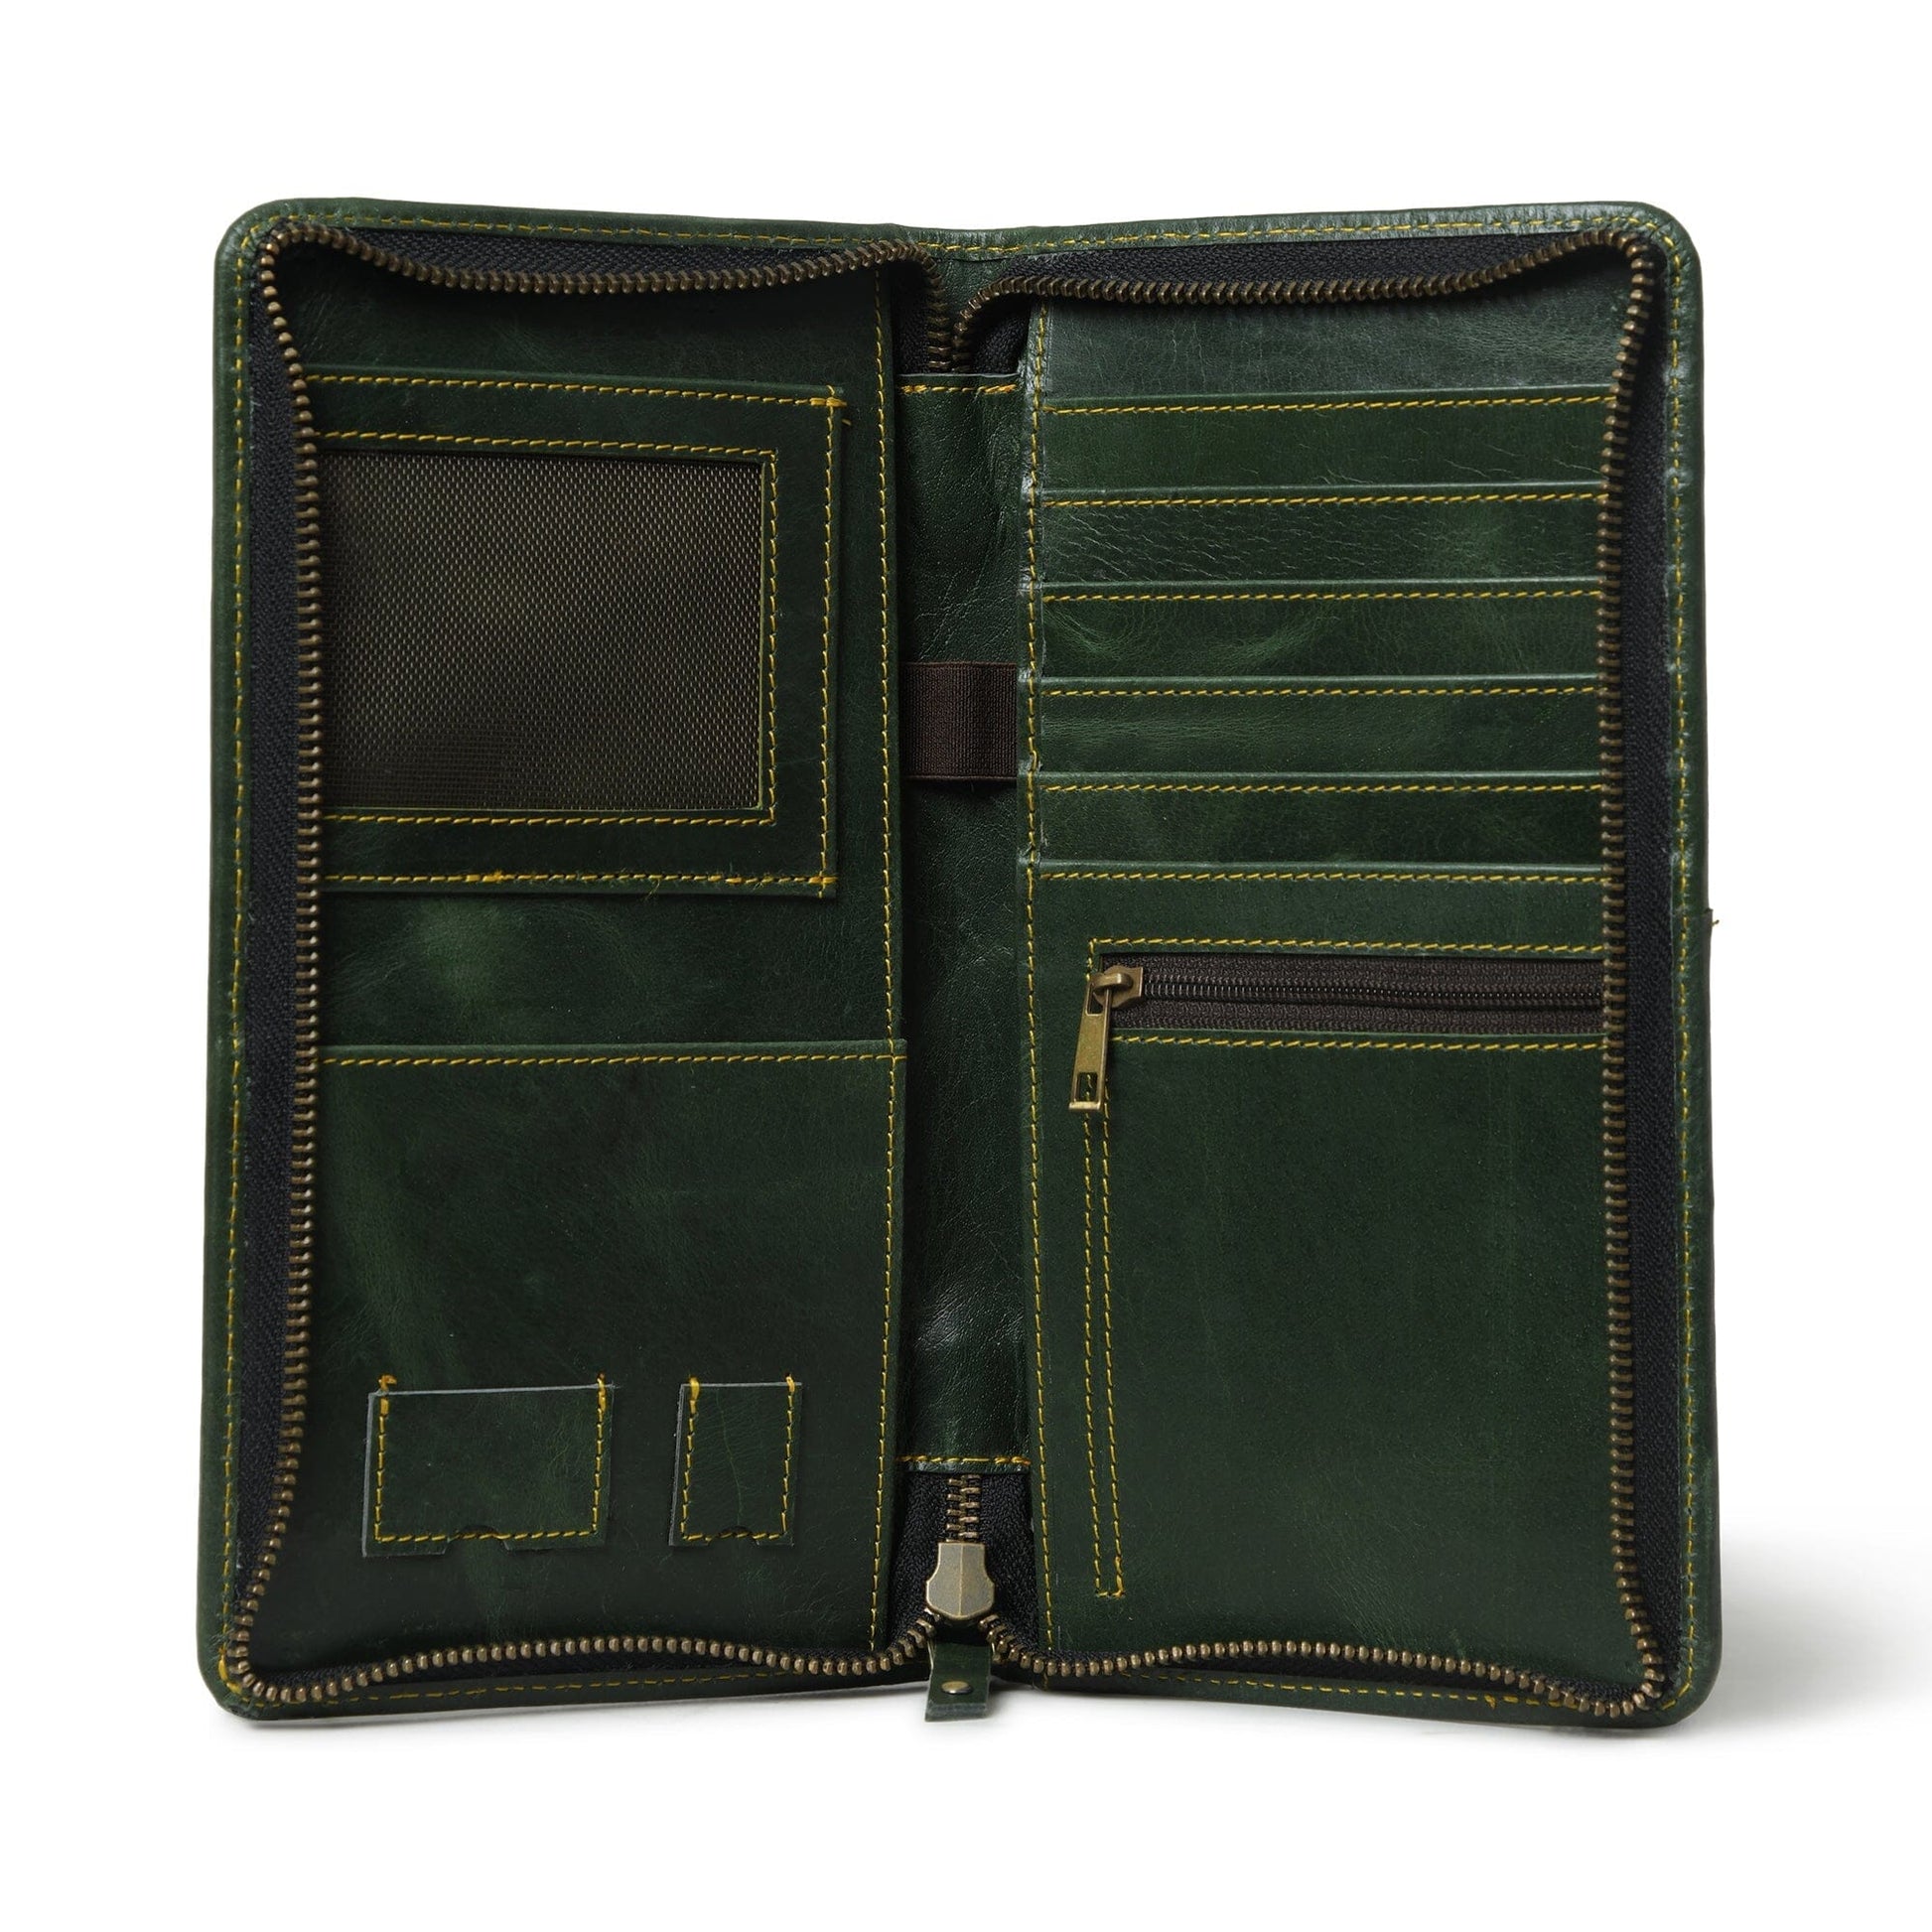 Blair Women's Wallet- Olive Green - The Tool Store